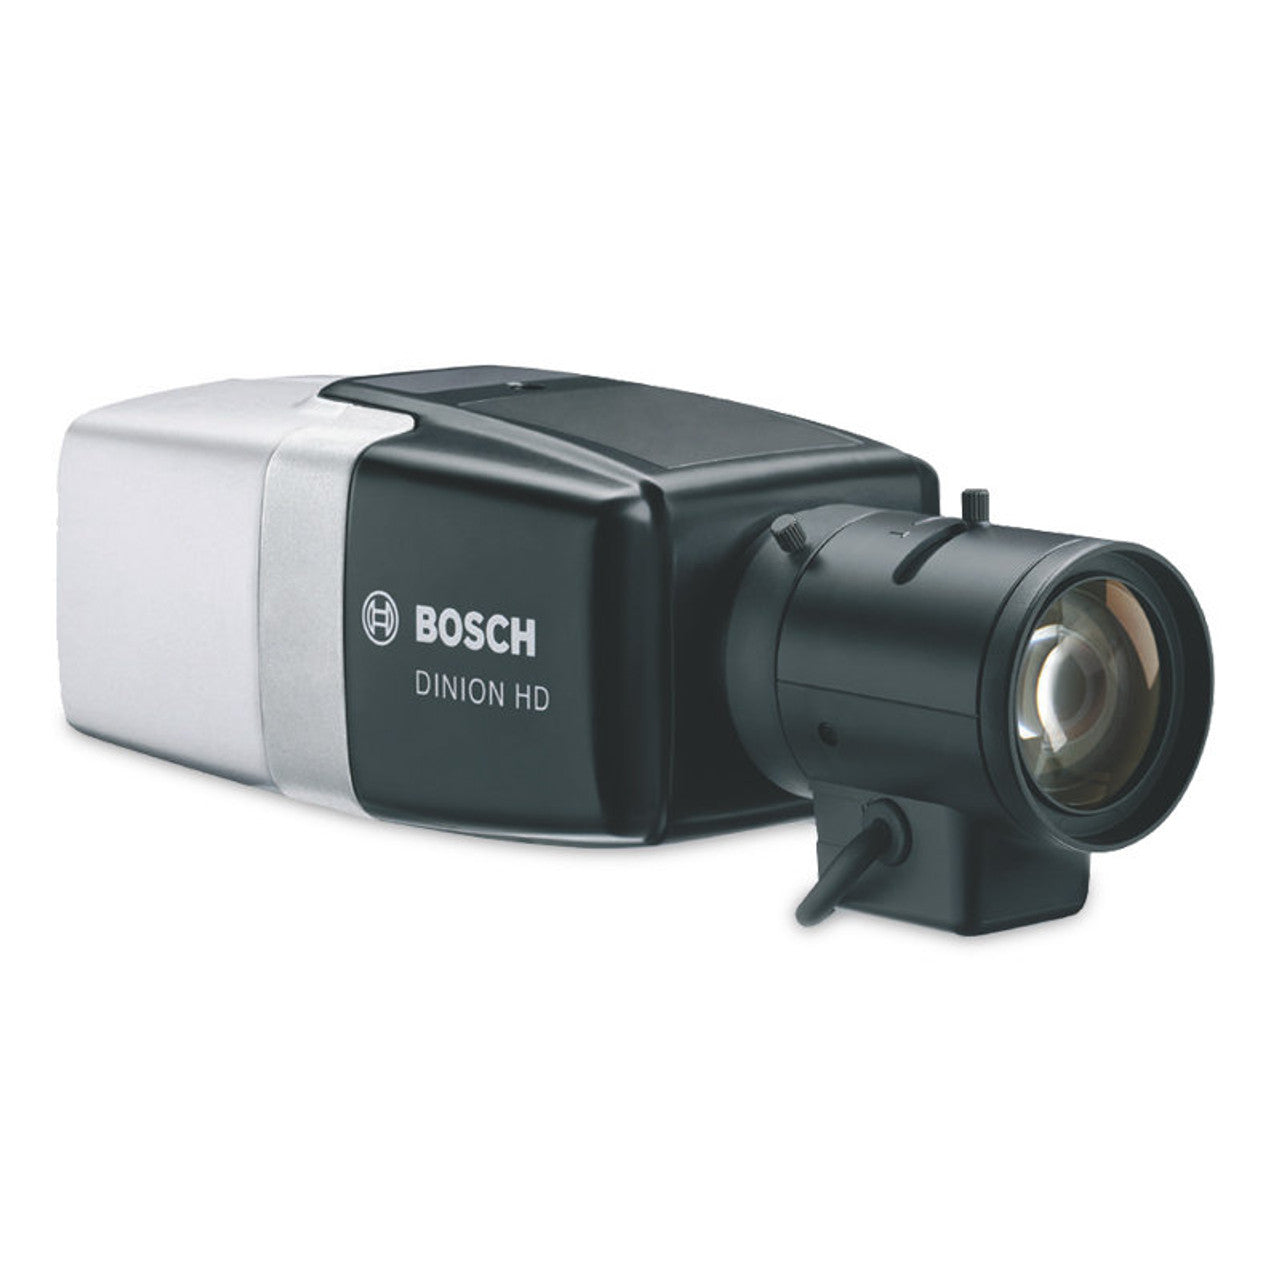 Bosch NBN-832V-P - Dinion HD 1080P IP Camera, Day/Night (Requires Lens)